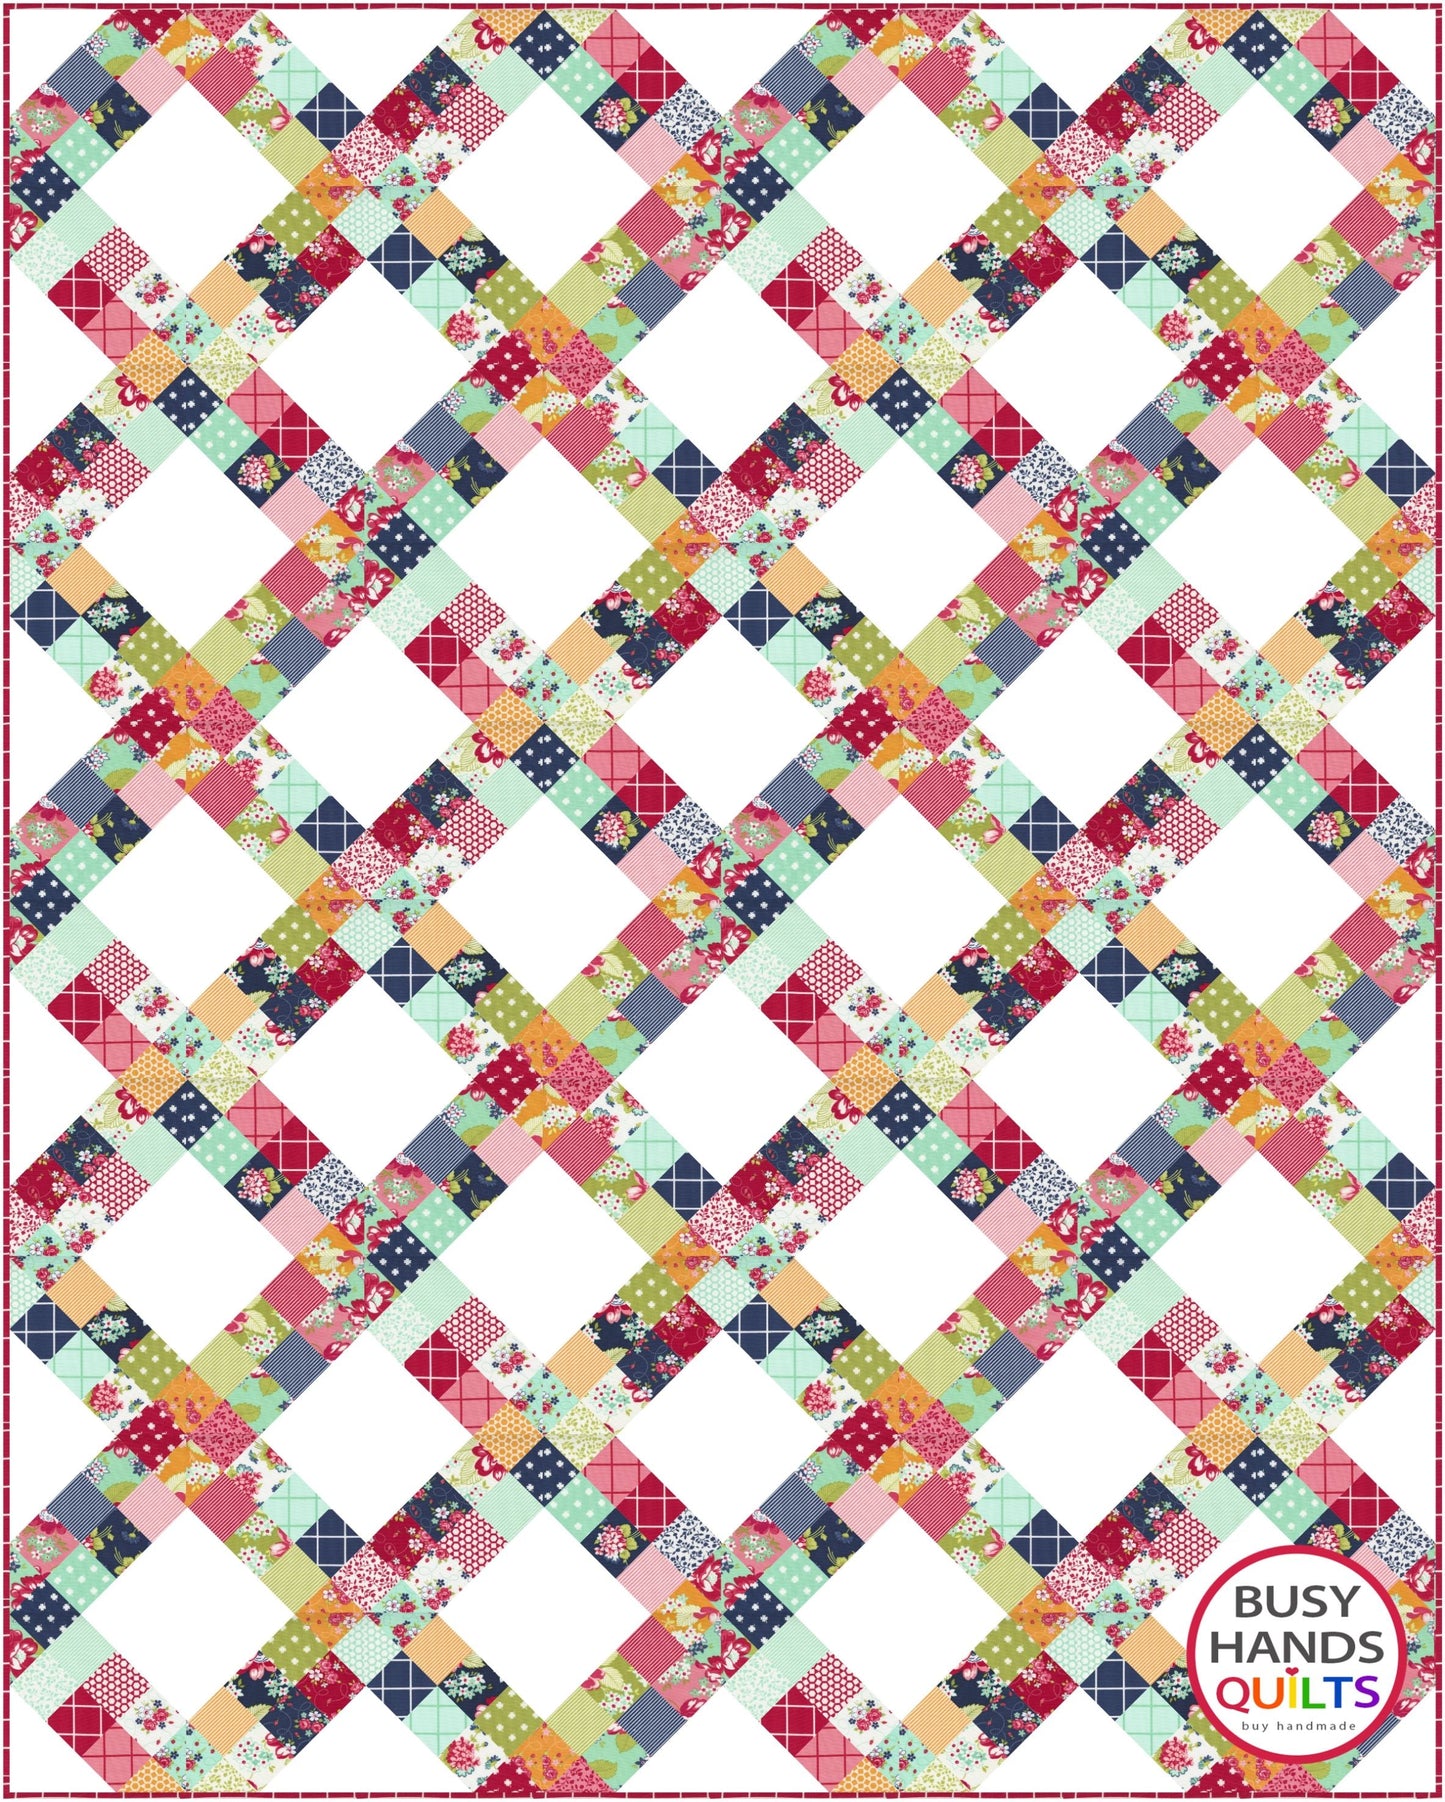 Hand Picked Quilt Pattern PDF DOWNLOAD Busy Hands Quilts $12.99